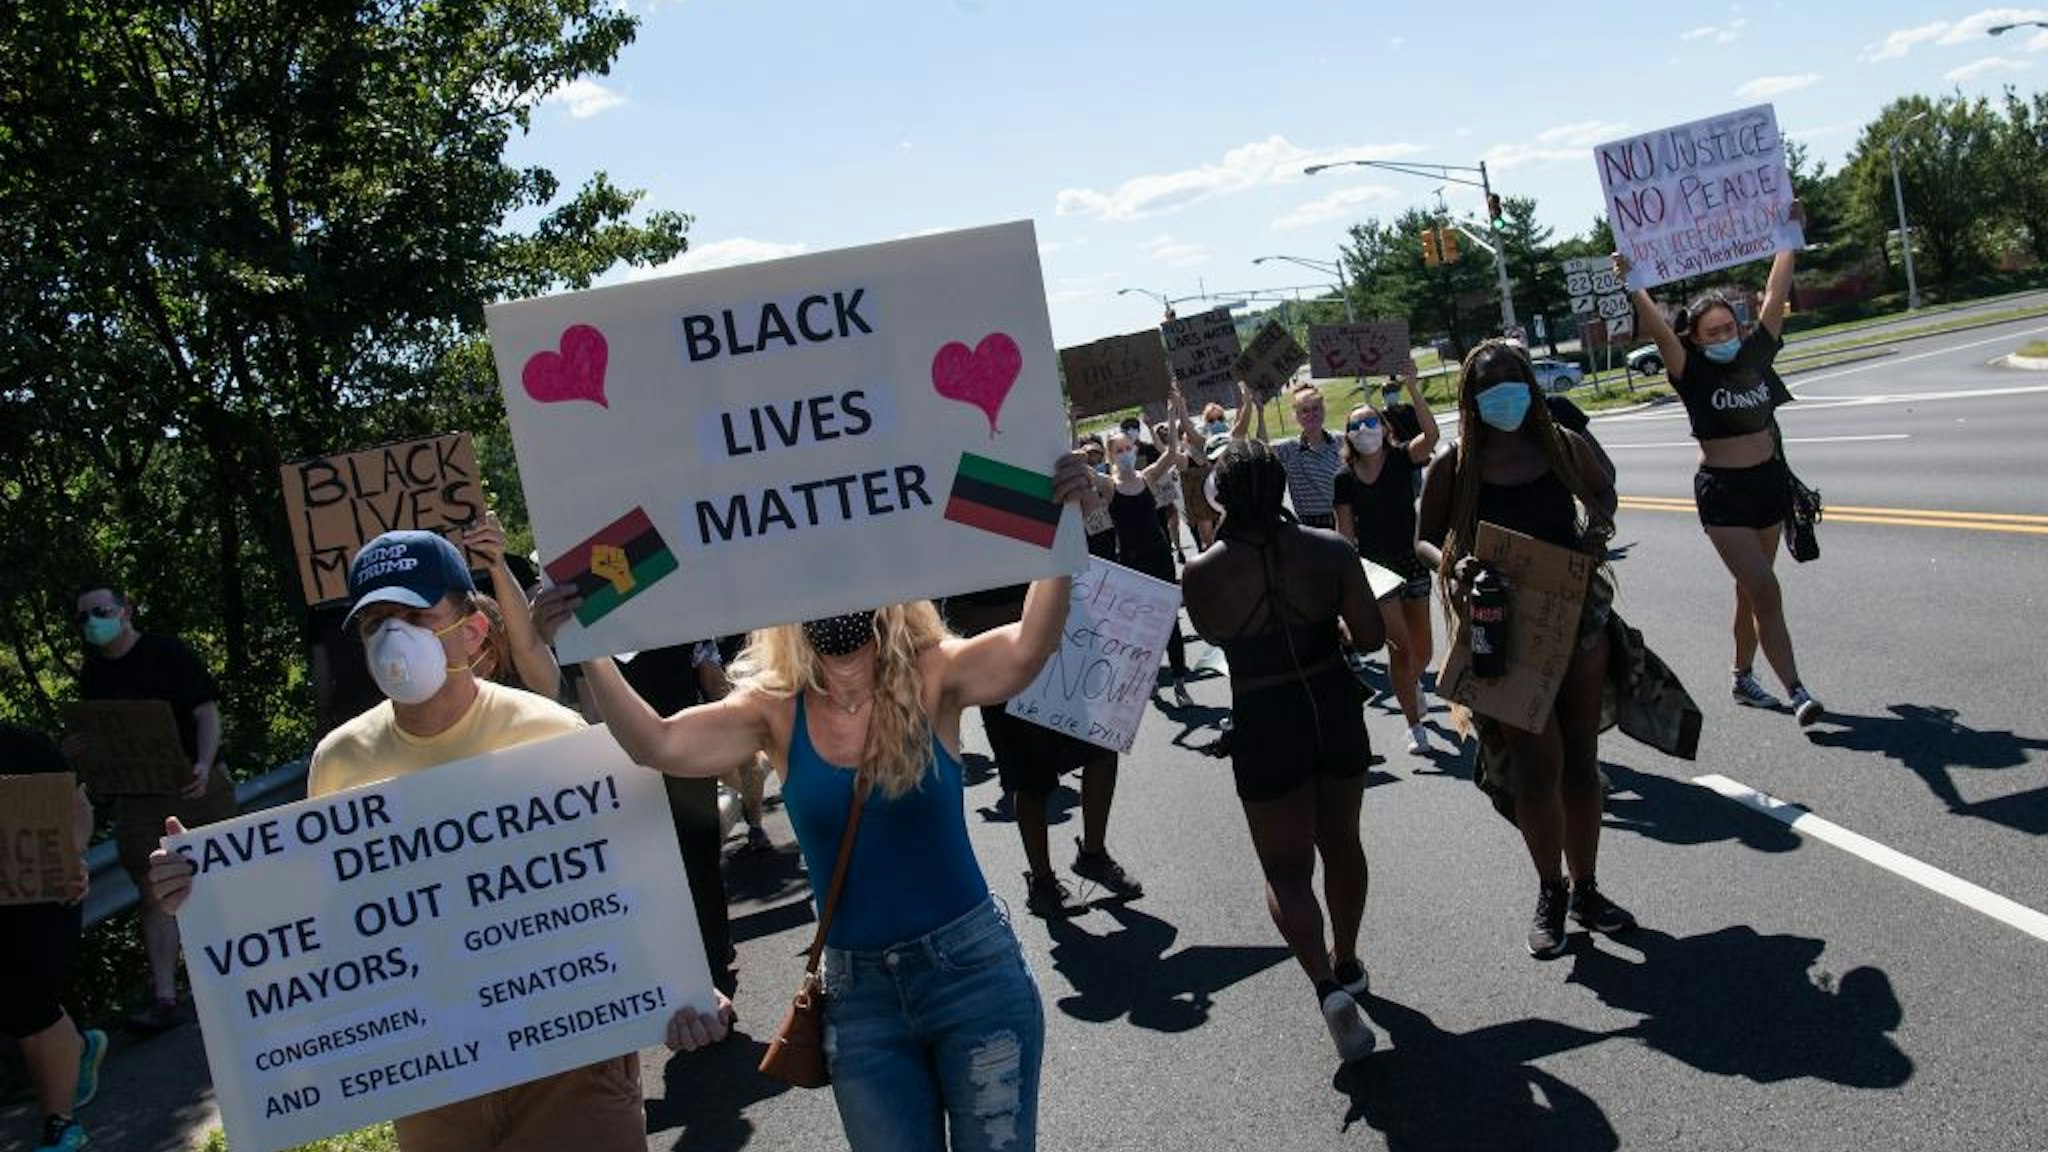 Protesters march in Bridgewater, New Jersey, on June 13, 2020 during a demonstration against police brutality and racism following the death of unarmed African-American George Floyd in Minneapolis on May 25.